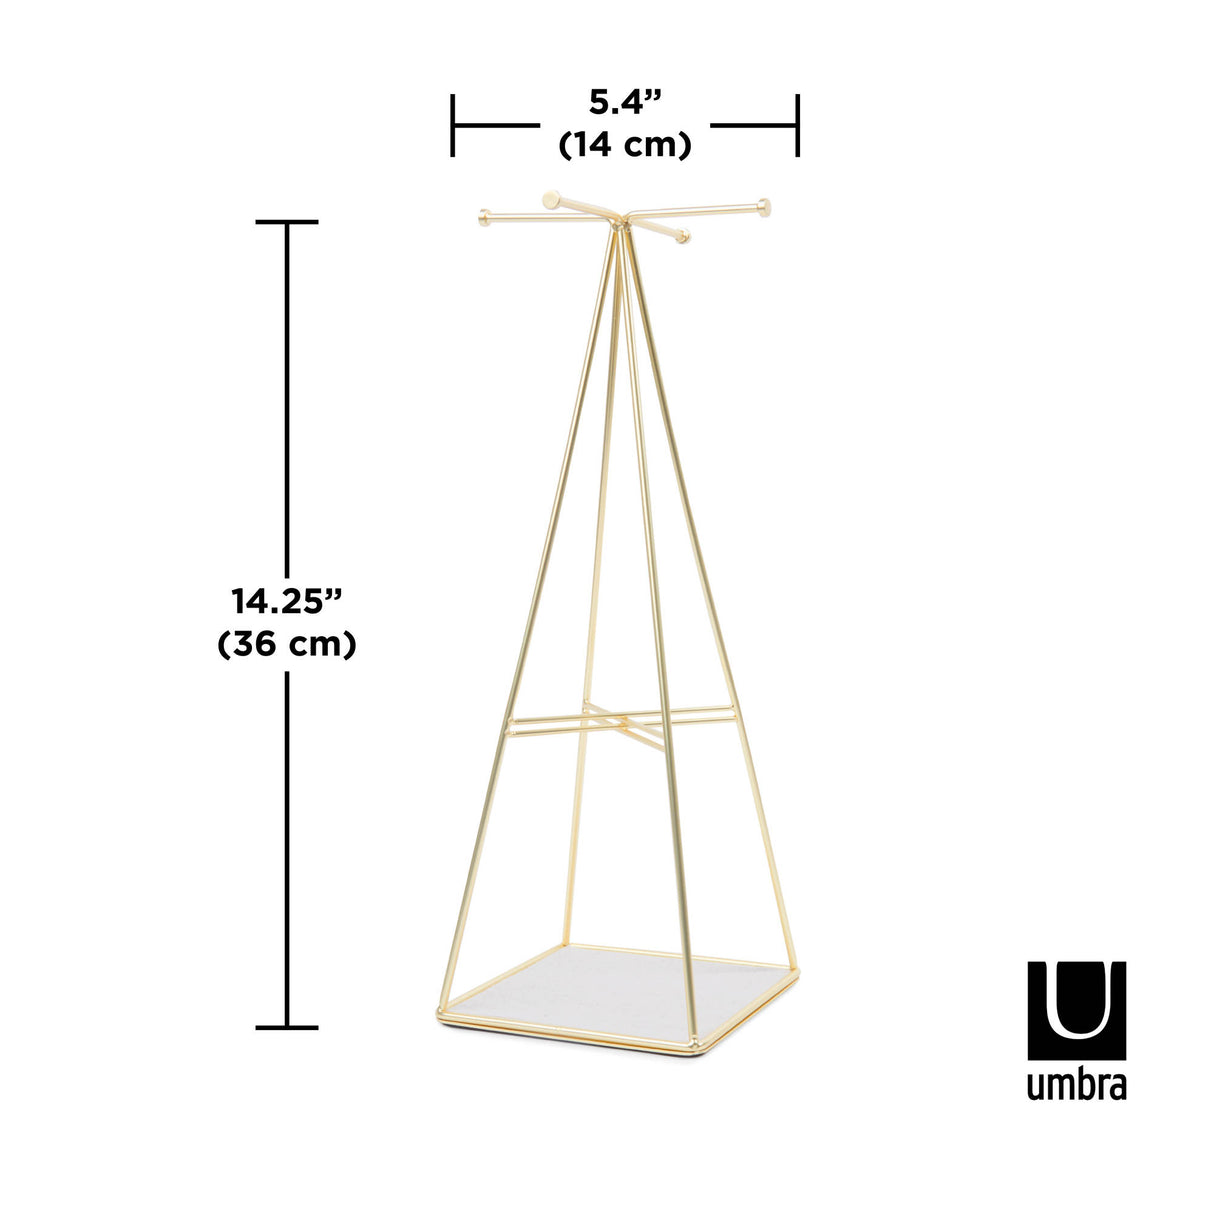 Umbra T-Bar Extra Tall Simple Jewelry Stand Necklace Bracelet Tree Display Holder Gift